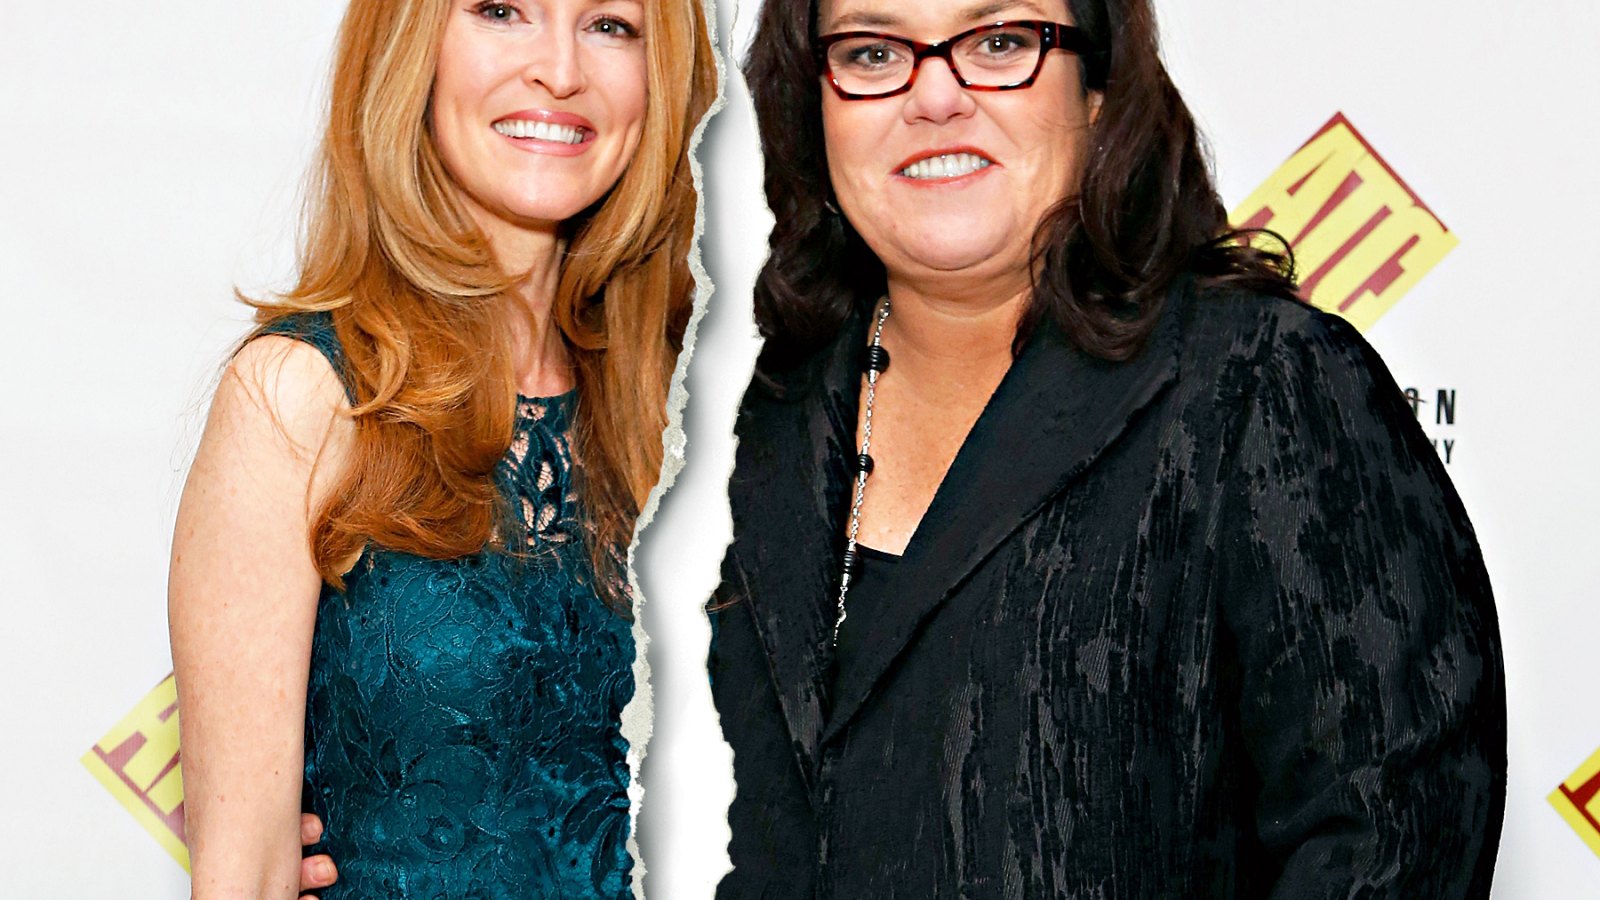 Michelle Rounds and Rosie O'Donnell